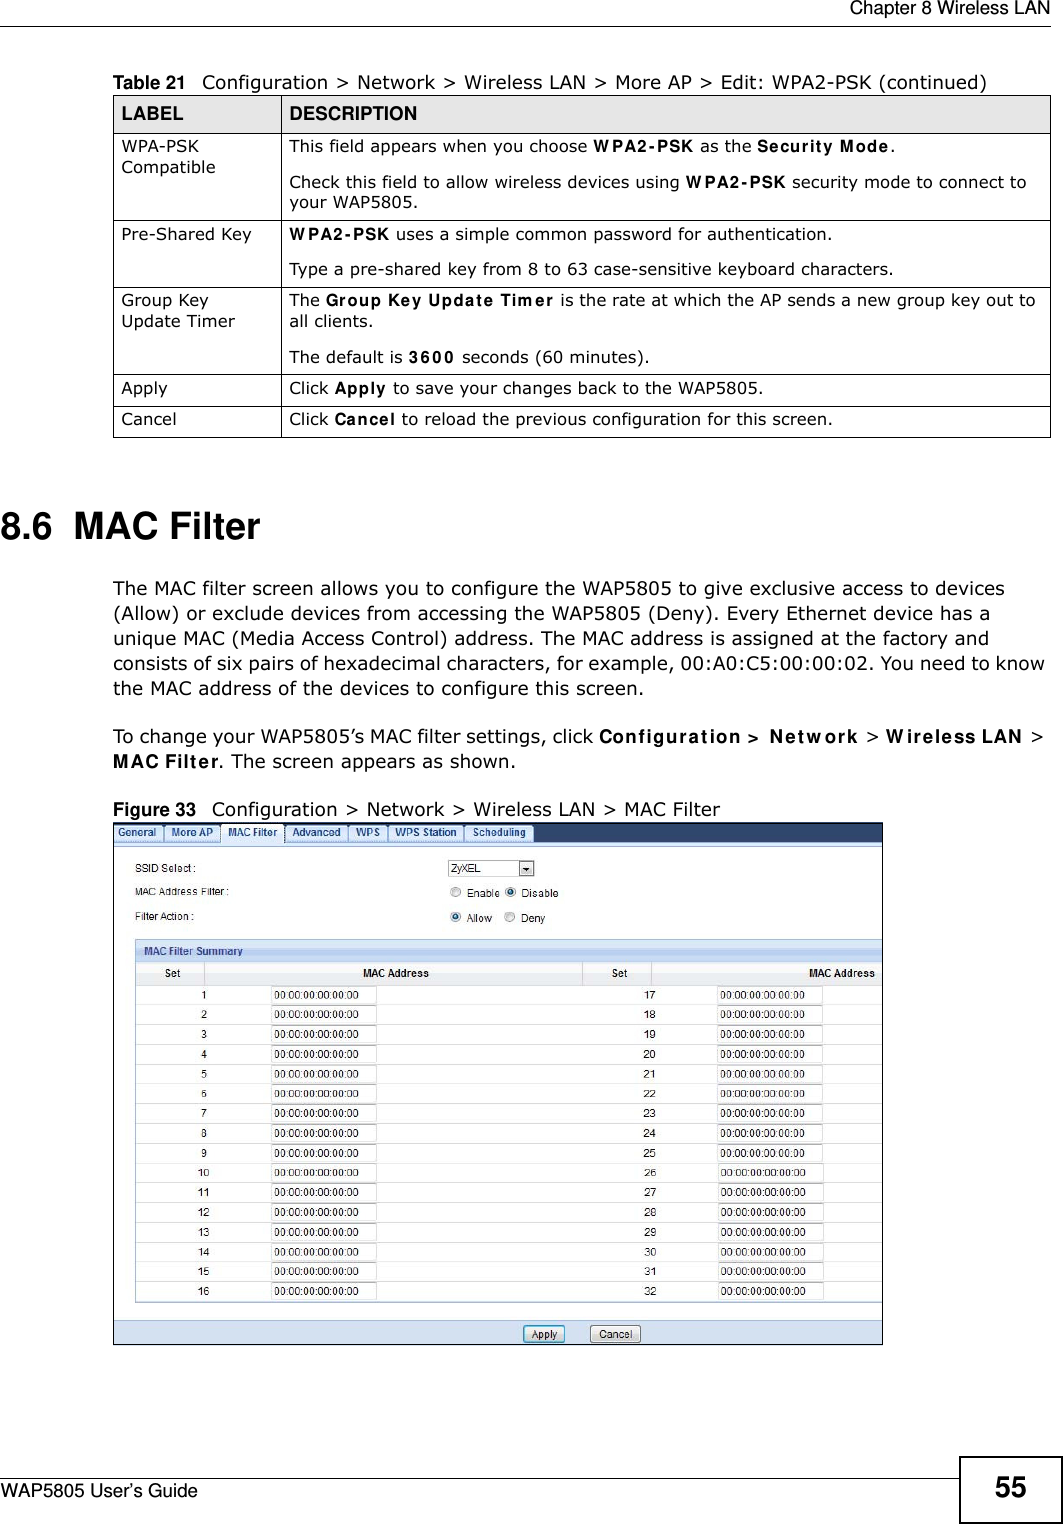  Chapter 8 Wireless LANWAP5805 User’s Guide 558.6  MAC Filter   The MAC filter screen allows you to configure the WAP5805 to give exclusive access to devices (Allow) or exclude devices from accessing the WAP5805 (Deny). Every Ethernet device has a unique MAC (Media Access Control) address. The MAC address is assigned at the factory and consists of six pairs of hexadecimal characters, for example, 00:A0:C5:00:00:02. You need to know the MAC address of the devices to configure this screen.To change your WAP5805’s MAC filter settings, click Configuration &gt; Network &gt; Wireless LAN &gt; MAC Filter. The screen appears as shown.Figure 33   Configuration &gt; Network &gt; Wireless LAN &gt; MAC FilterWPA-PSK CompatibleThis field appears when you choose WPA2-PSK as the Security Mode.Check this field to allow wireless devices using WPA2-PSK security mode to connect to your WAP5805.Pre-Shared Key  WPA2-PSK uses a simple common password for authentication.Type a pre-shared key from 8 to 63 case-sensitive keyboard characters.Group Key Update TimerThe Group Key Update Timer is the rate at which the AP sends a new group key out to all clients. The default is 3600 seconds (60 minutes).Apply Click Apply to save your changes back to the WAP5805.Cancel Click Cancel to reload the previous configuration for this screen.Table 21   Configuration &gt; Network &gt; Wireless LAN &gt; More AP &gt; Edit: WPA2-PSK (continued)LABEL DESCRIPTION